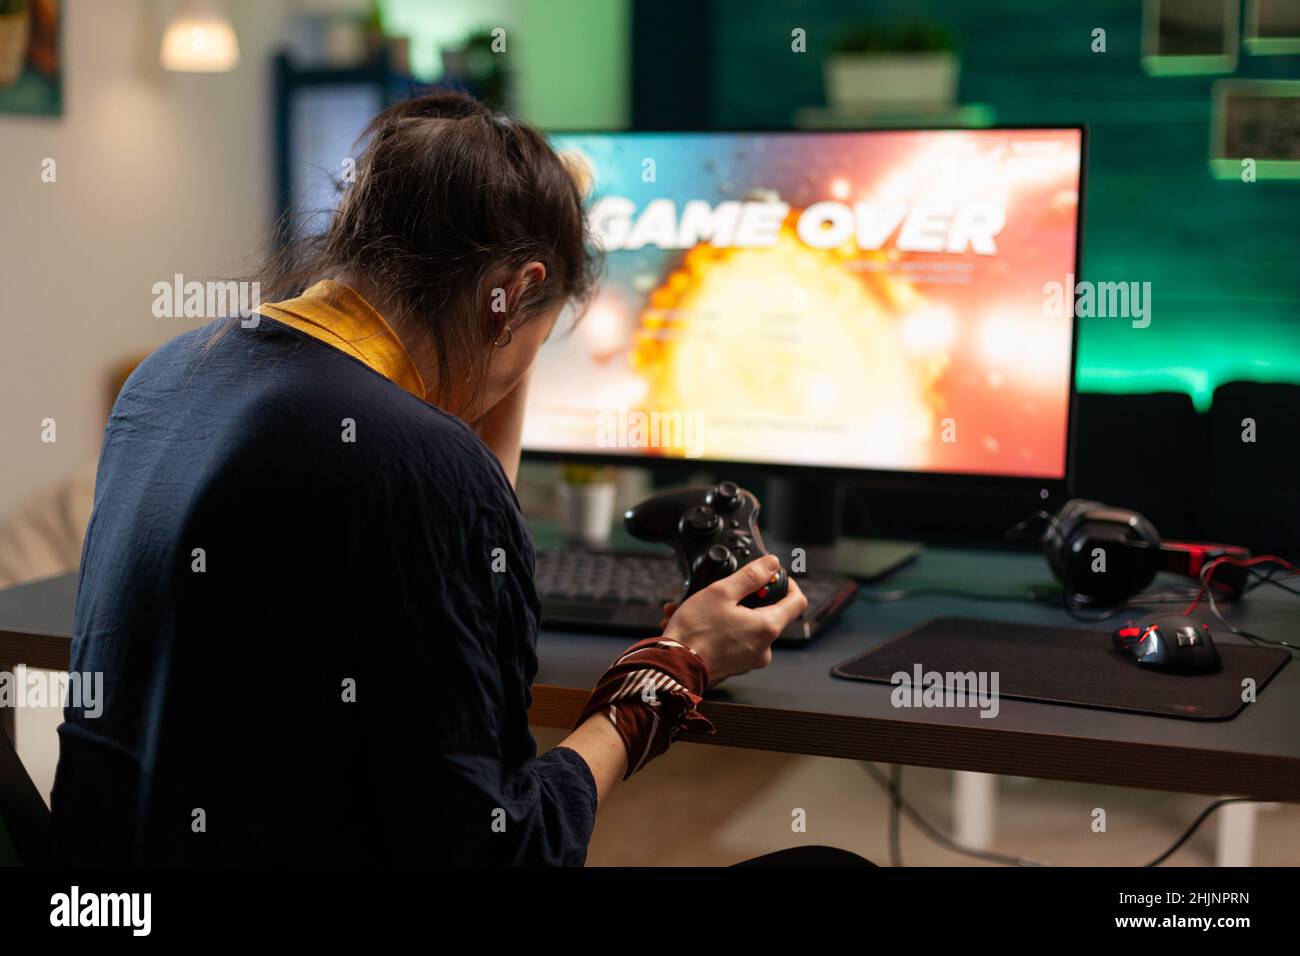 Angry woman playing online video games with joystick. Gamer using controller on computer to play internet games and losing. Disappointed person with electronic gaming equipment. Stock Photo